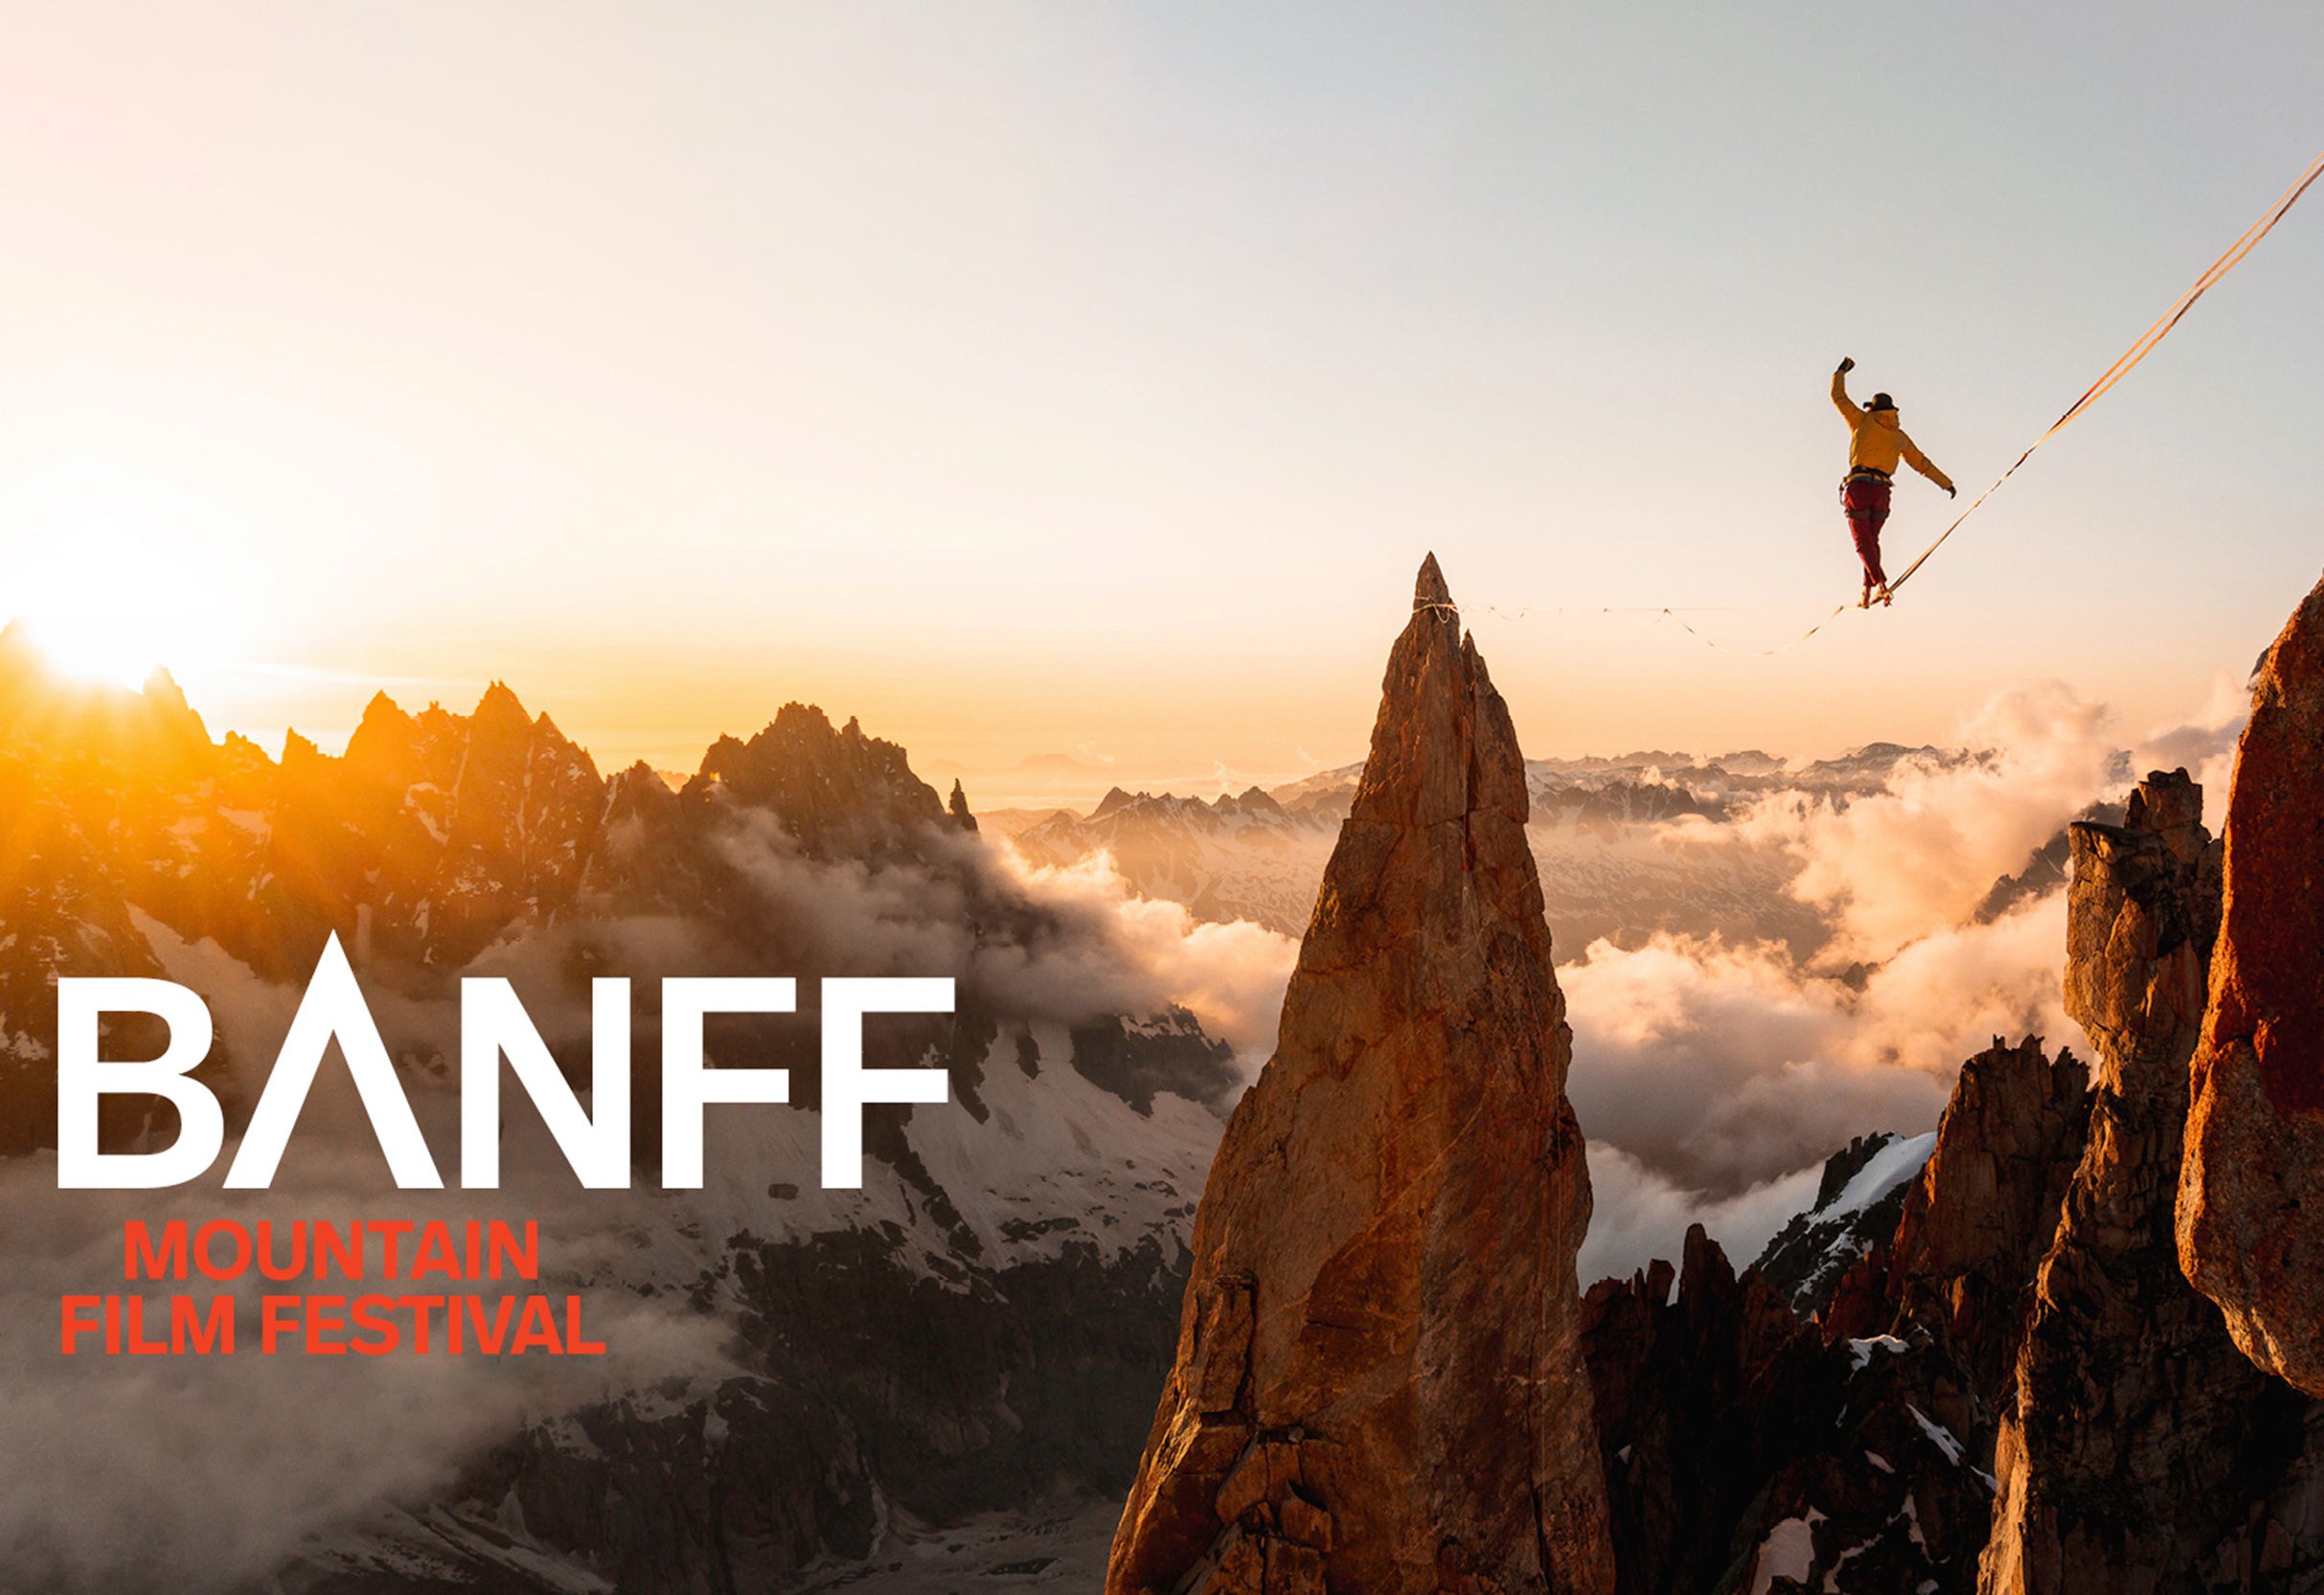 Banff Centre Mountain Film Festival World Tour - Paintbrush in Washington promo photo for National Geographic presale offer code